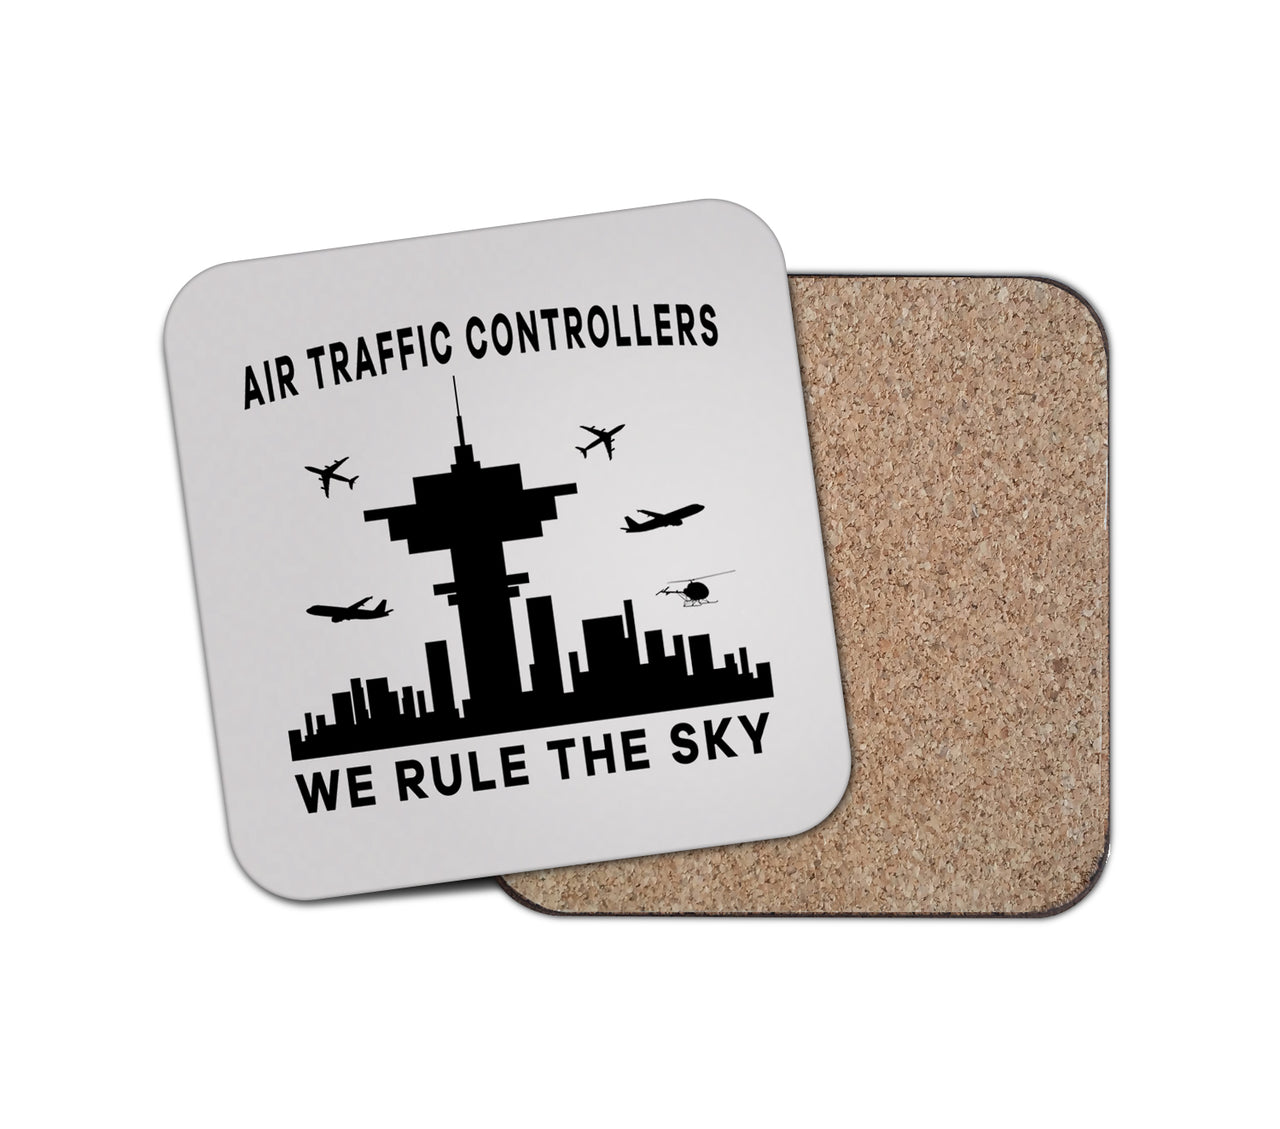 Air Traffic Controllers - We Rule The Sky Designed Coasters